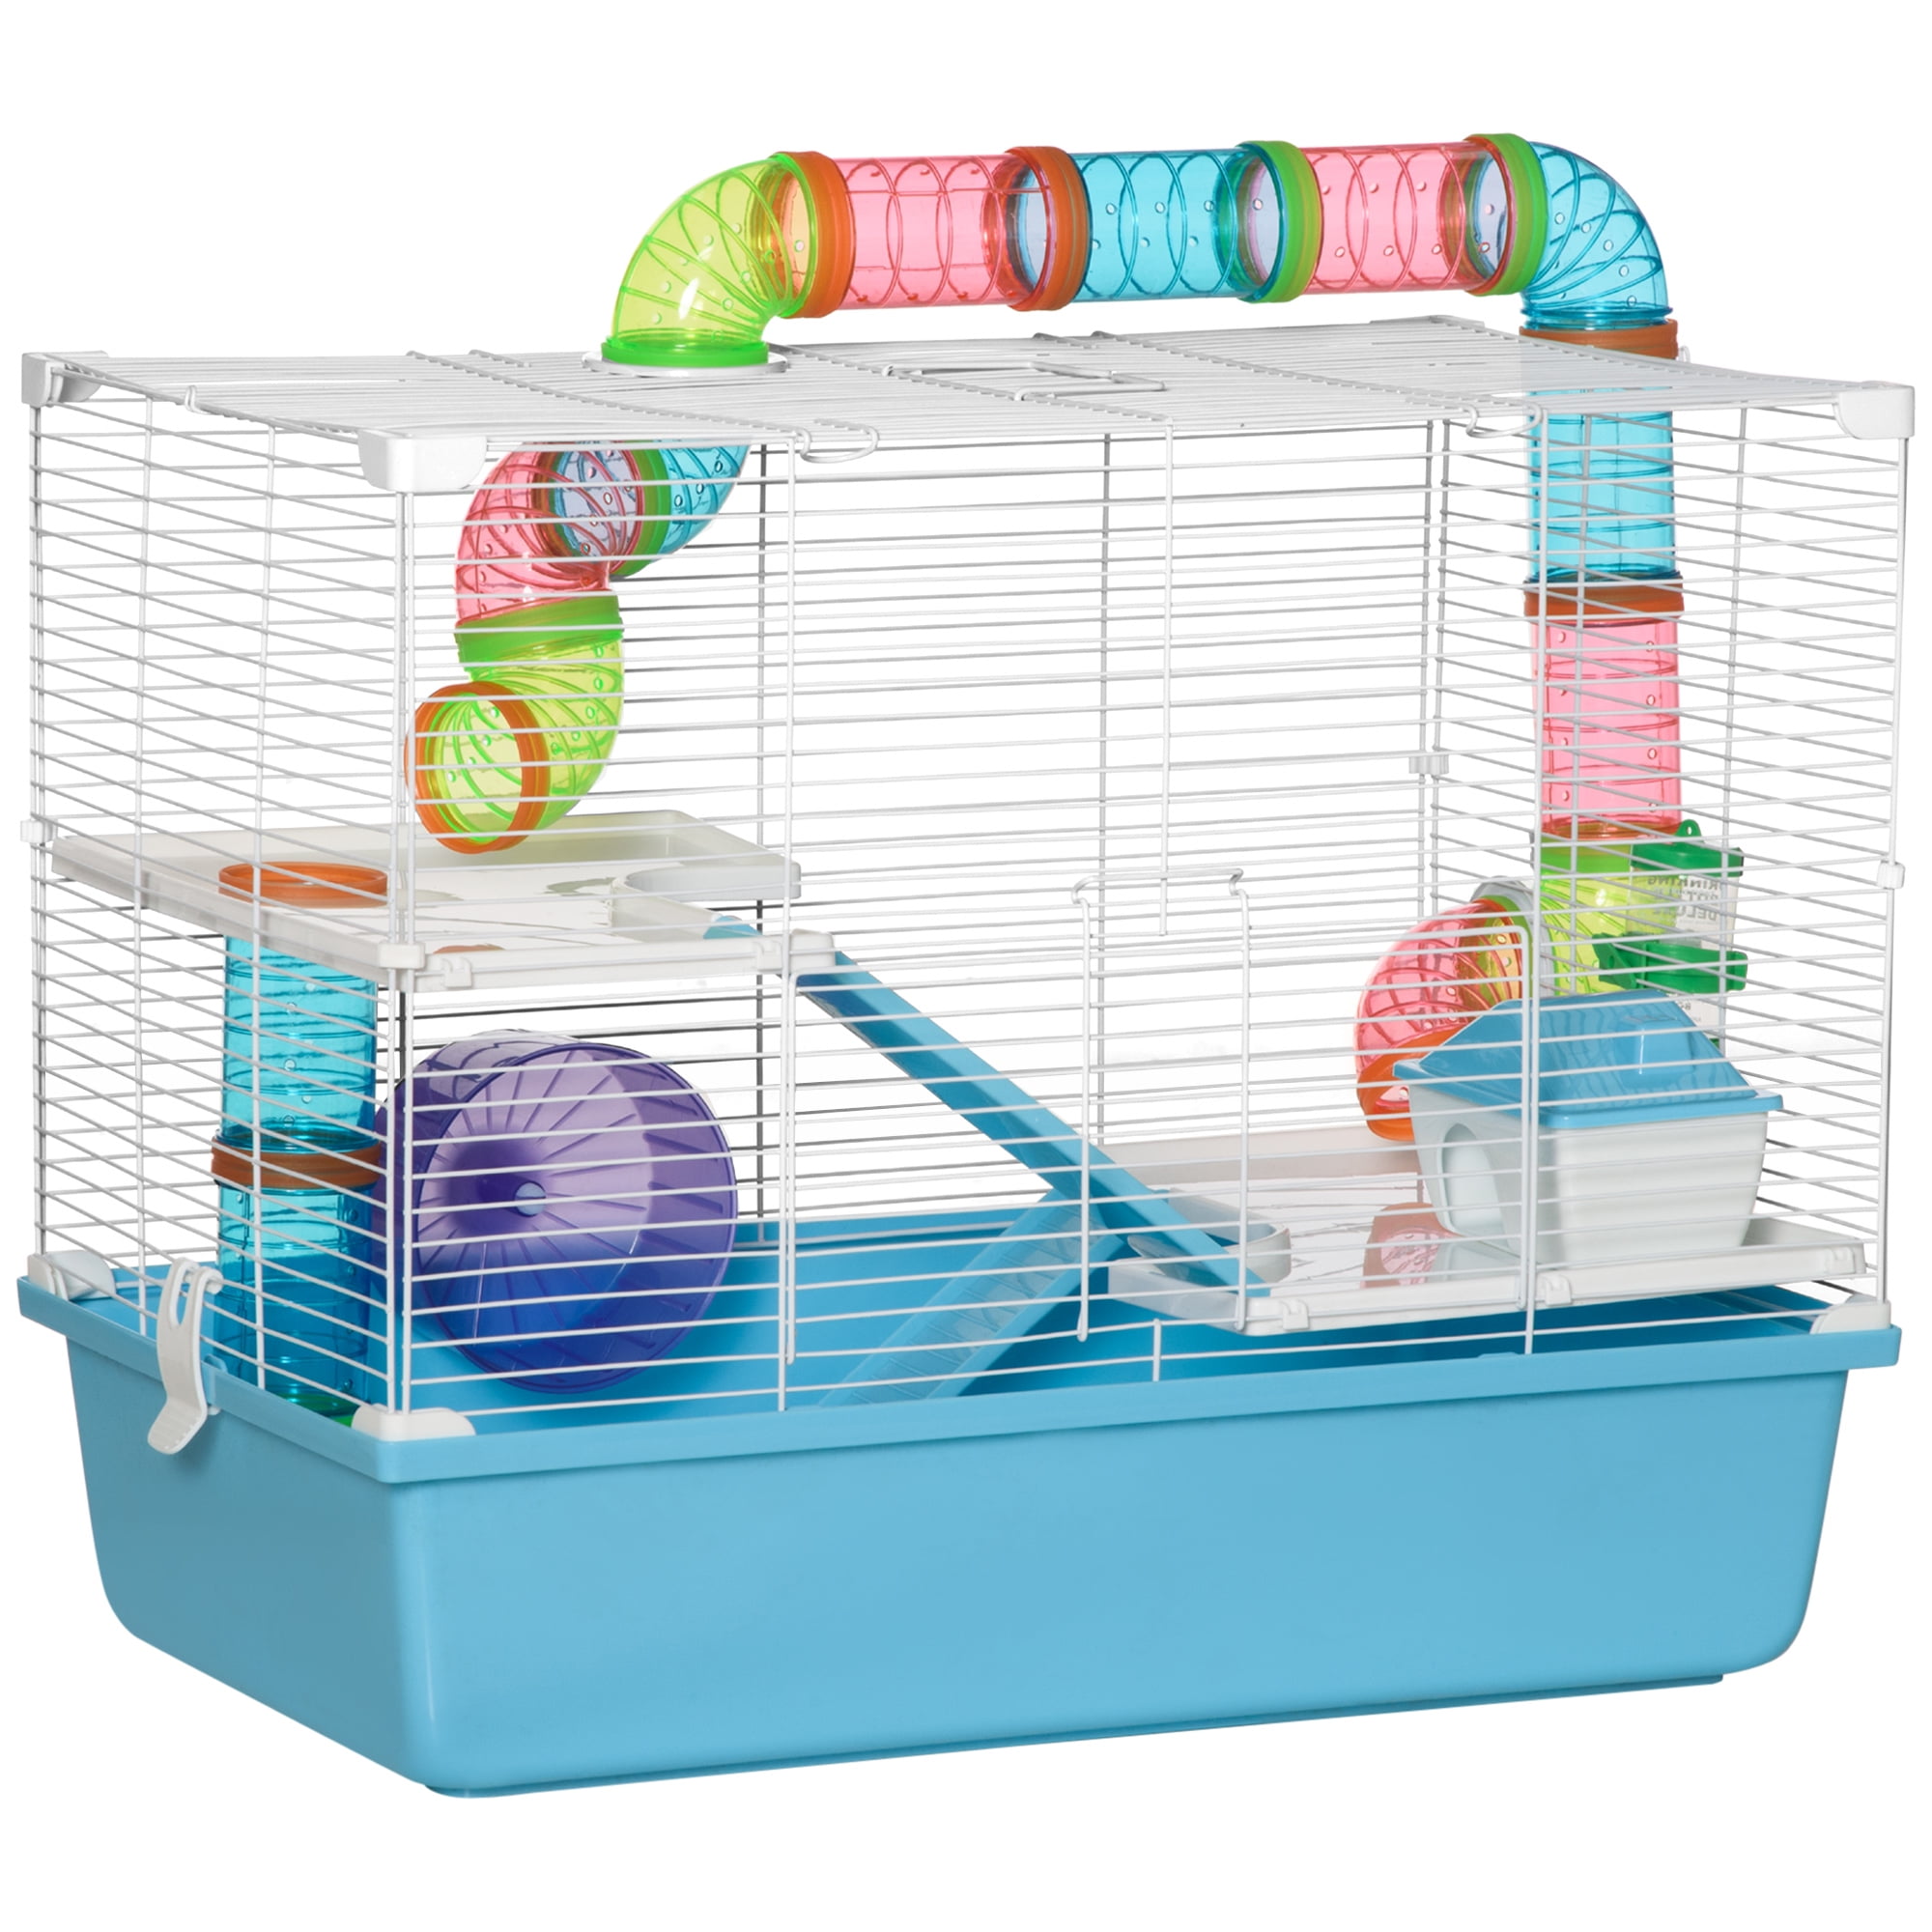 6. Customize or Convenient: Choosing the Perfect Exercise Tunnels and Tubes for Your Hamster